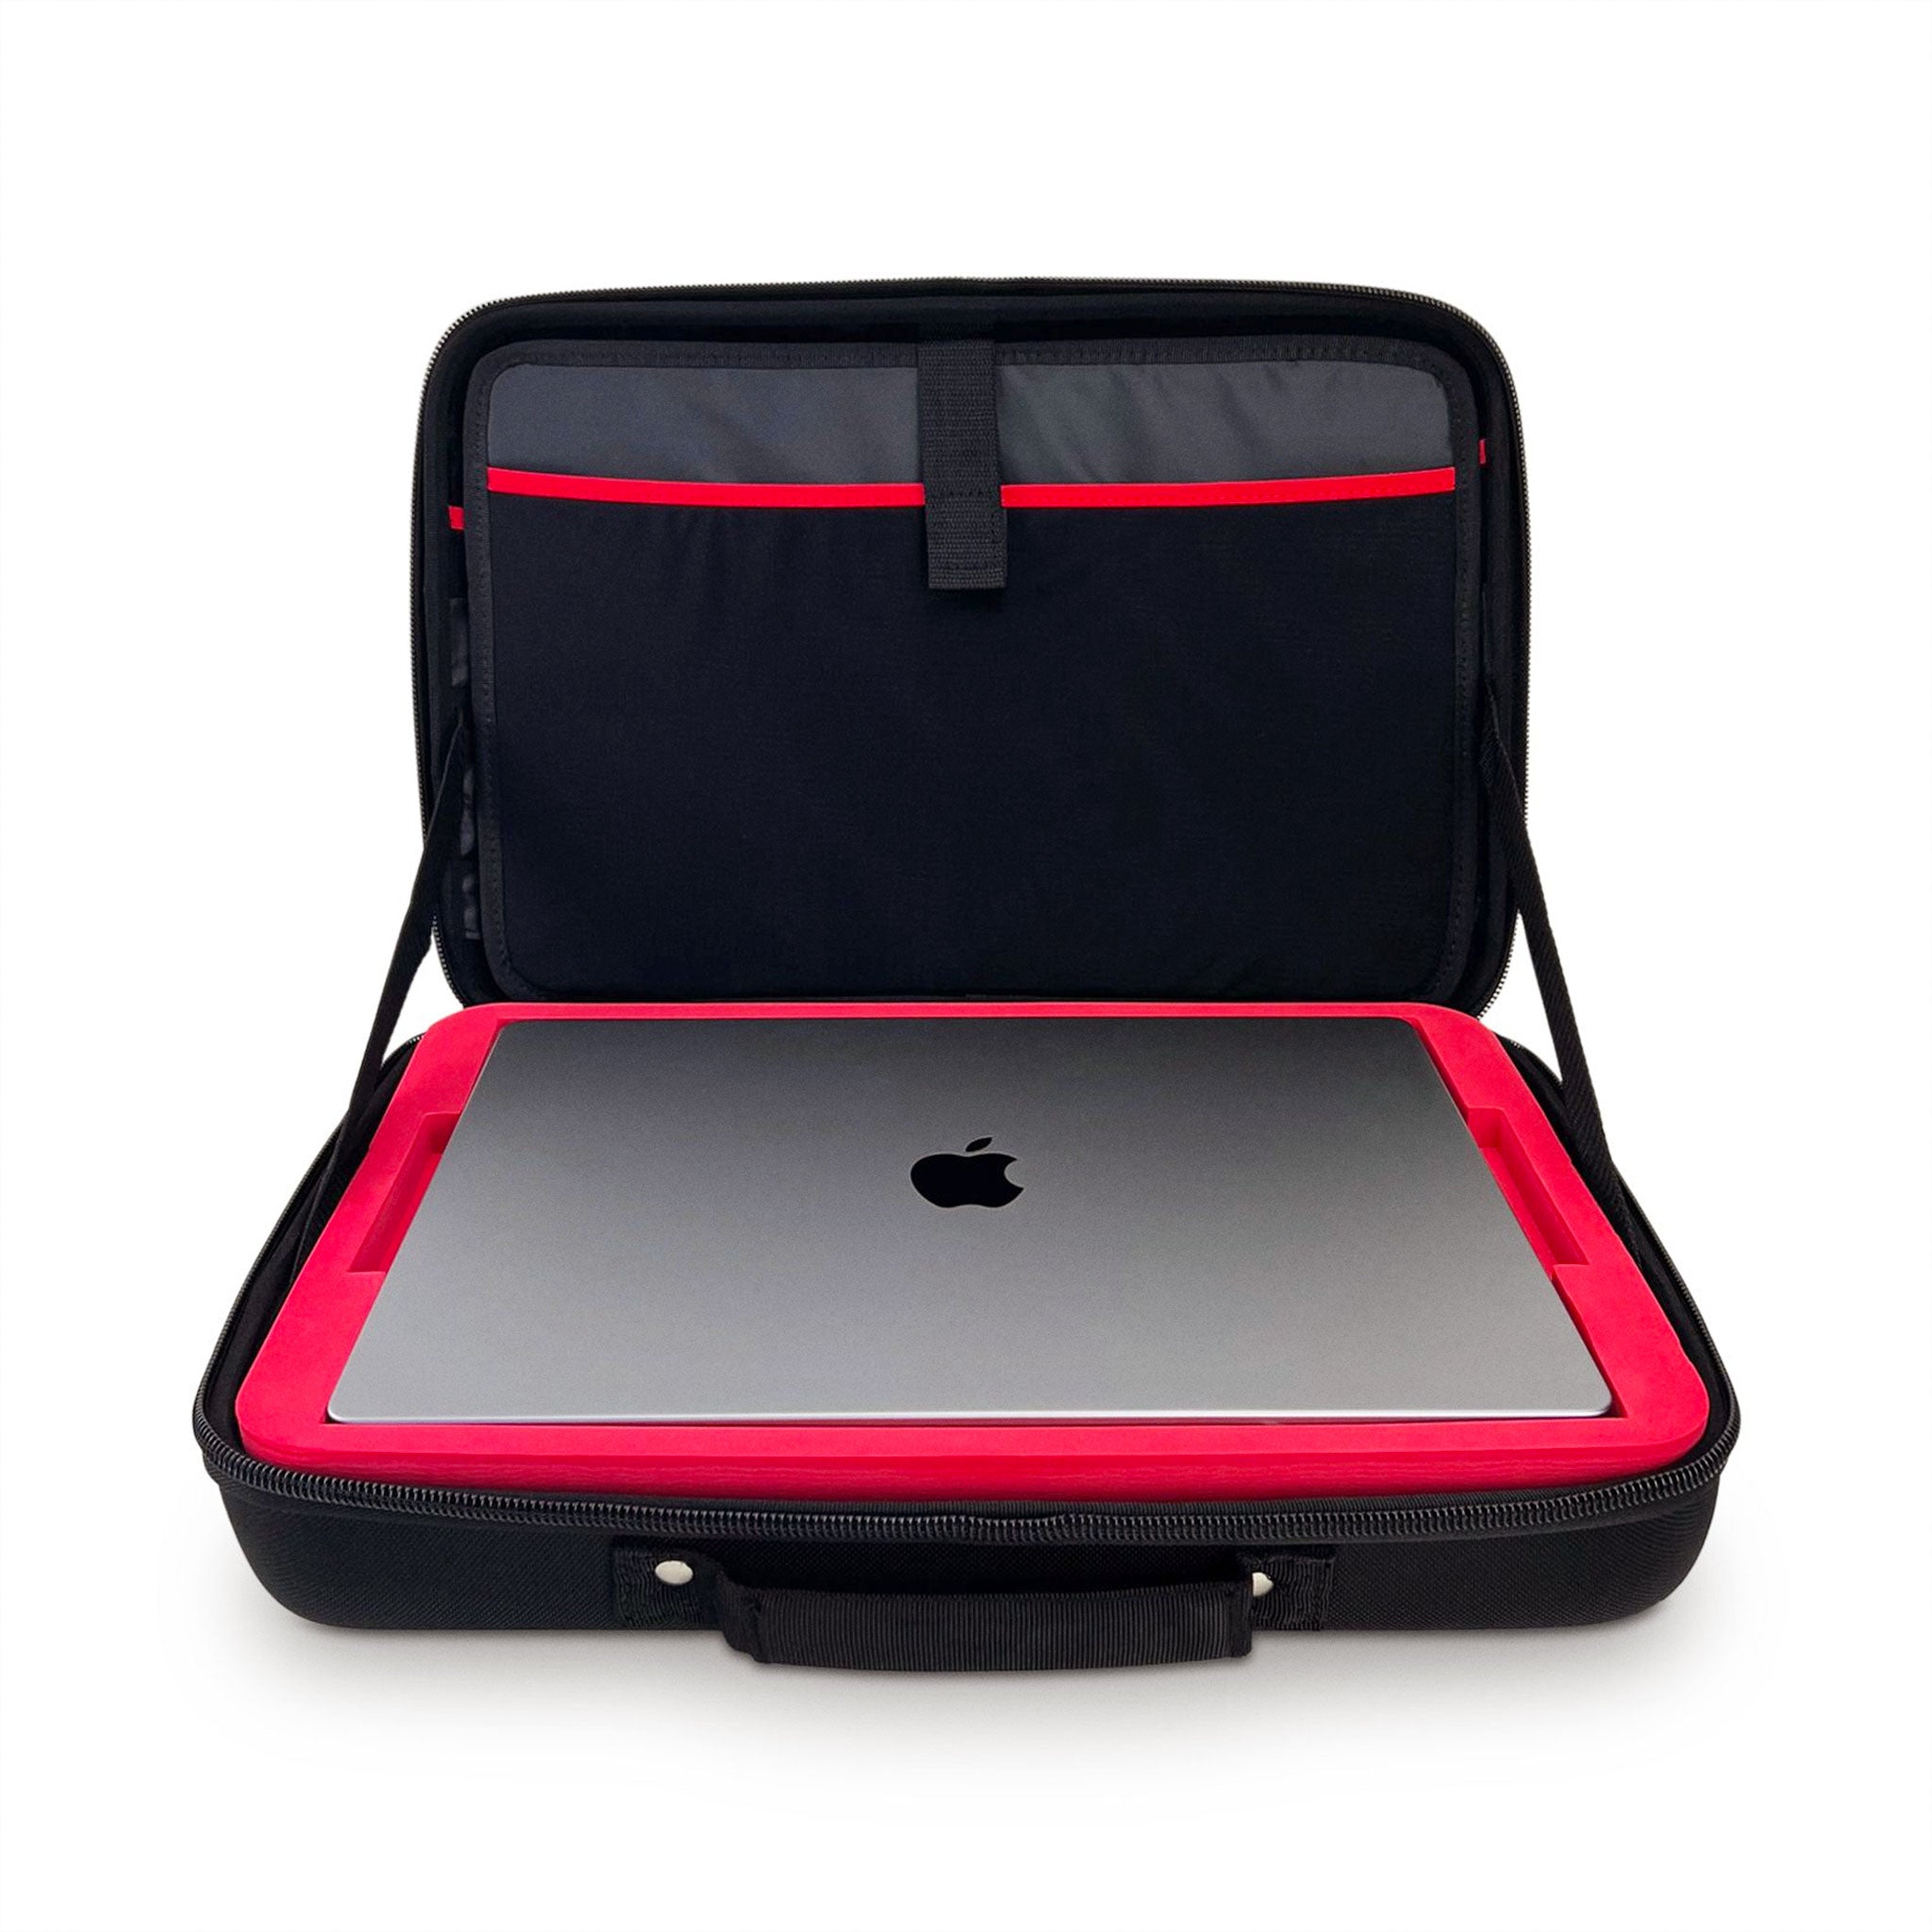 Analog Cases Pulse Case for 16 MacBook Pro